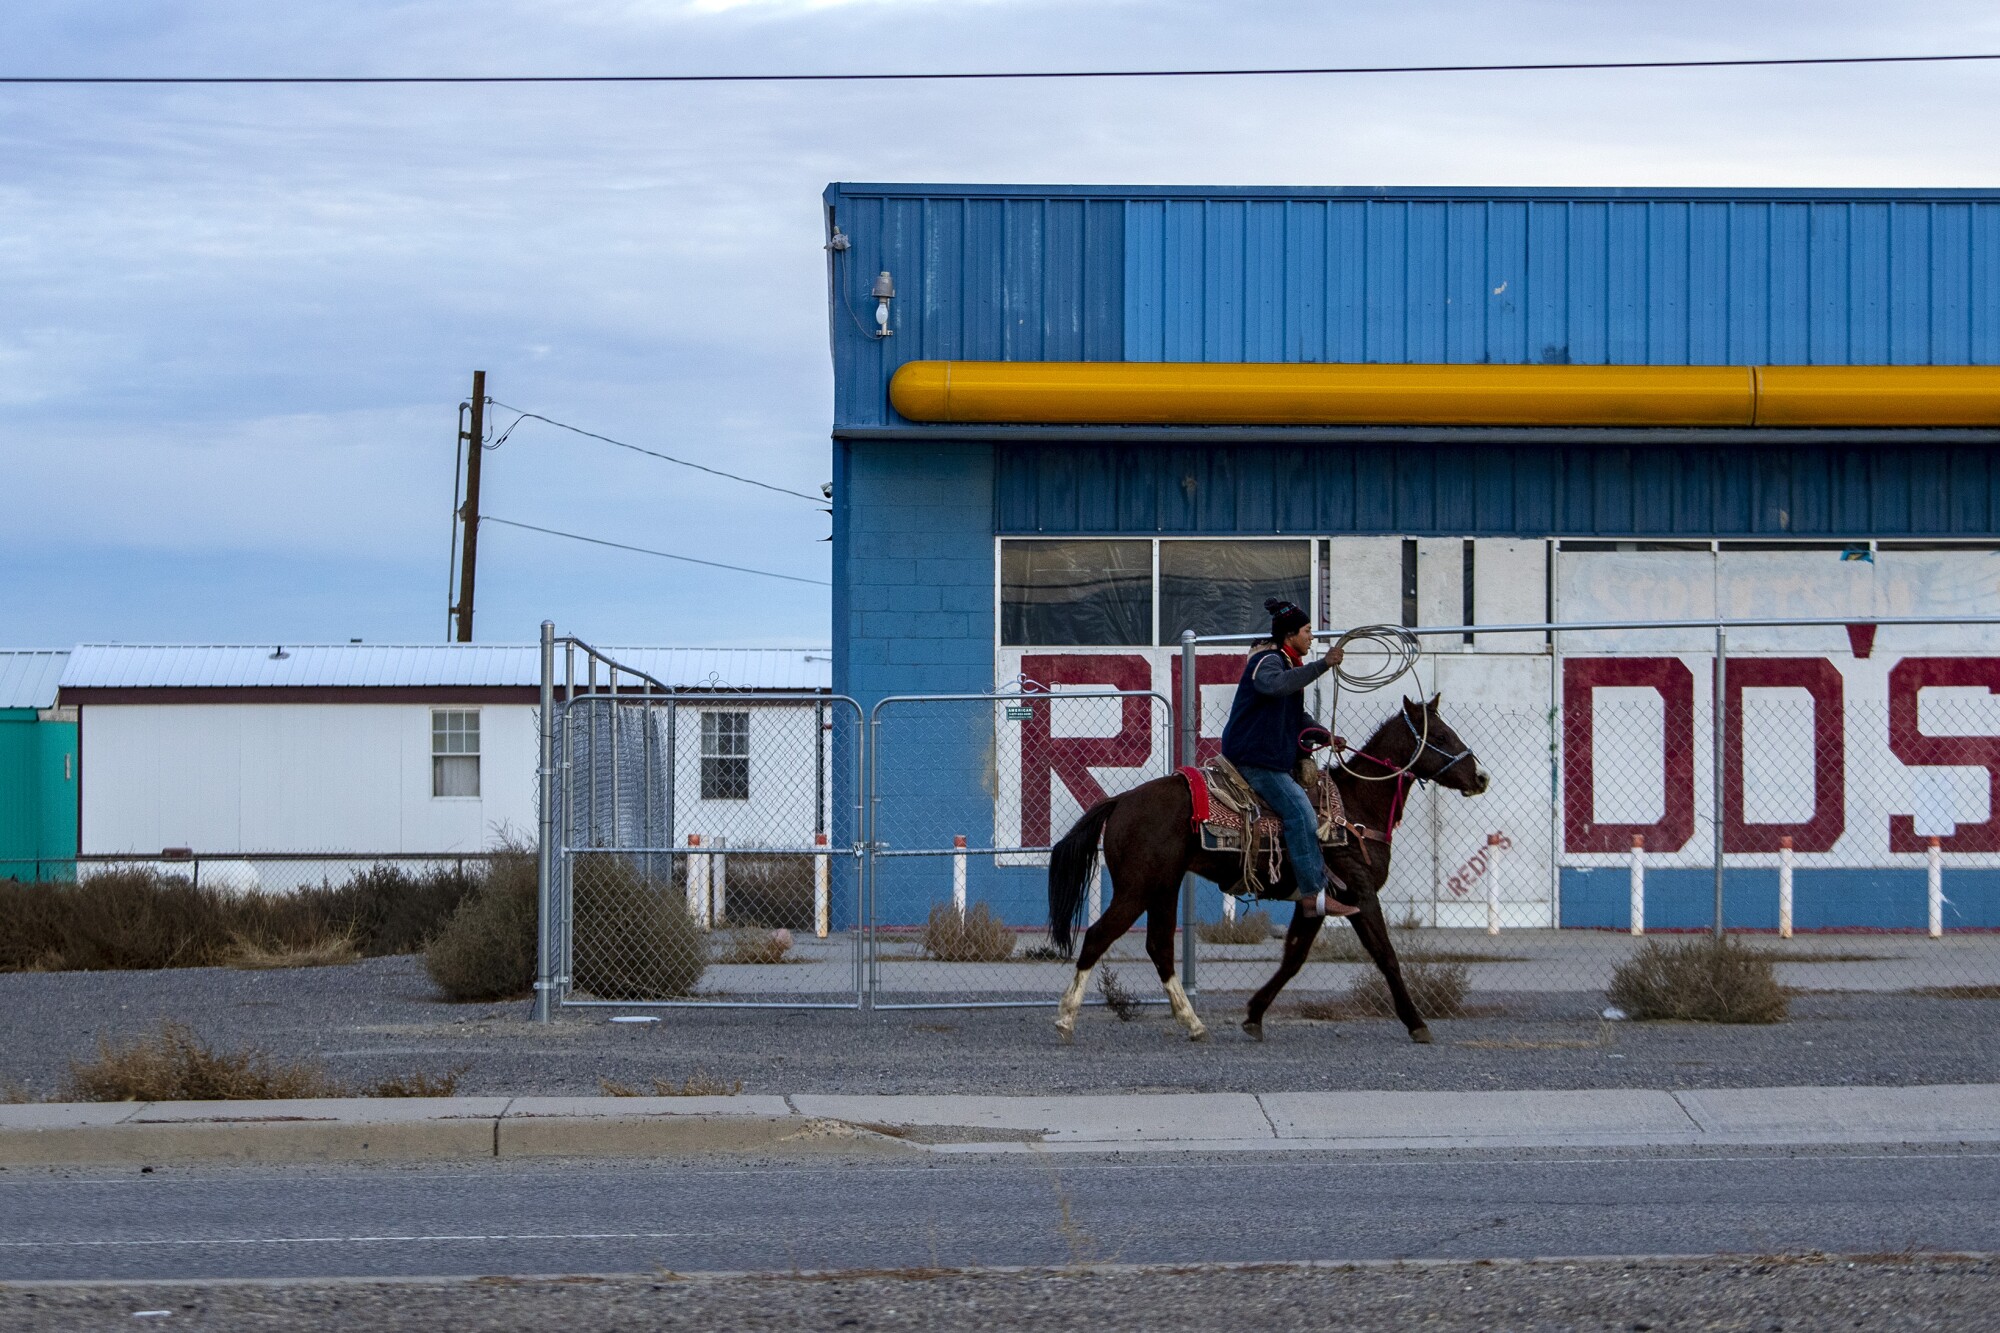  A man on a horse rides through a town on the Navajo Nation where coronavirus cases are surging to all-time highs. Native Americans nationwide are among the most high risk groups of catching the virus. (Brian van der Brug/Los Angeles Times)